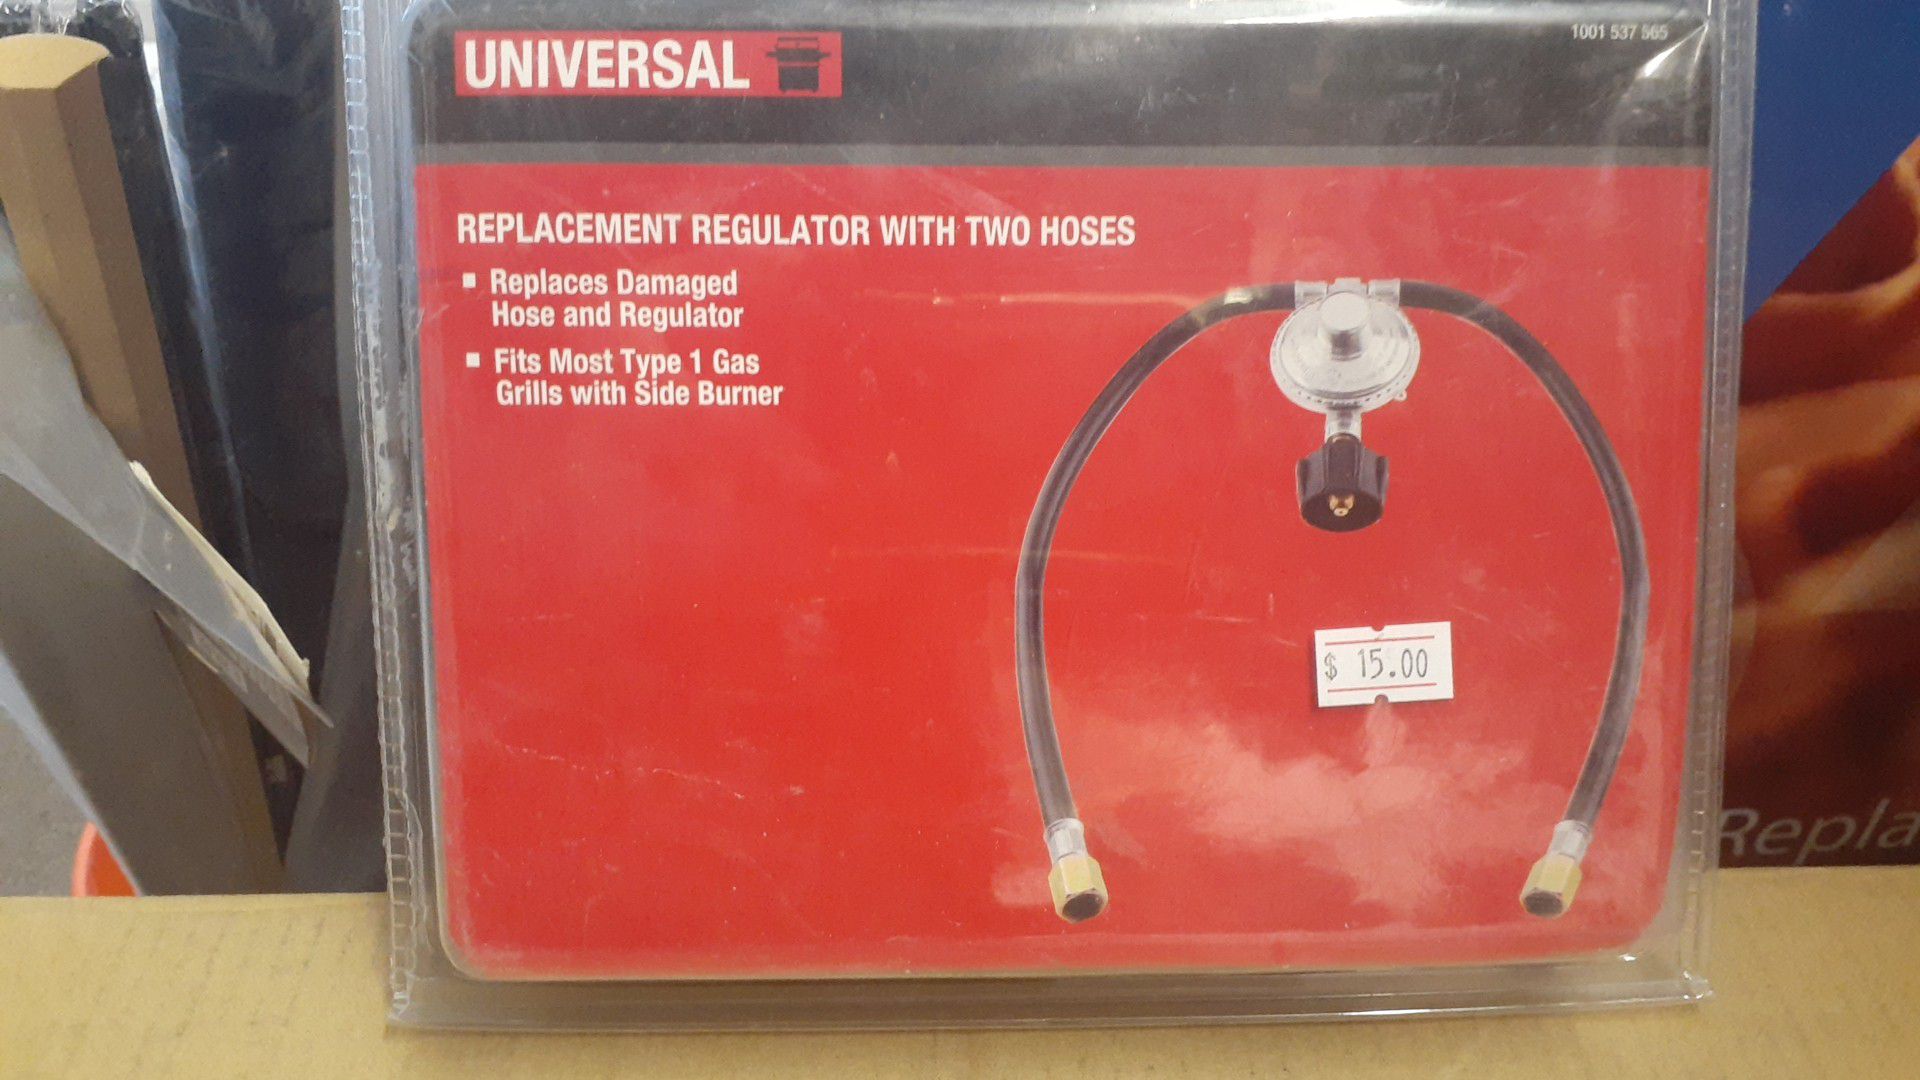 Universal replacement regulator with 2 hoses for grill/bbq/barbecue